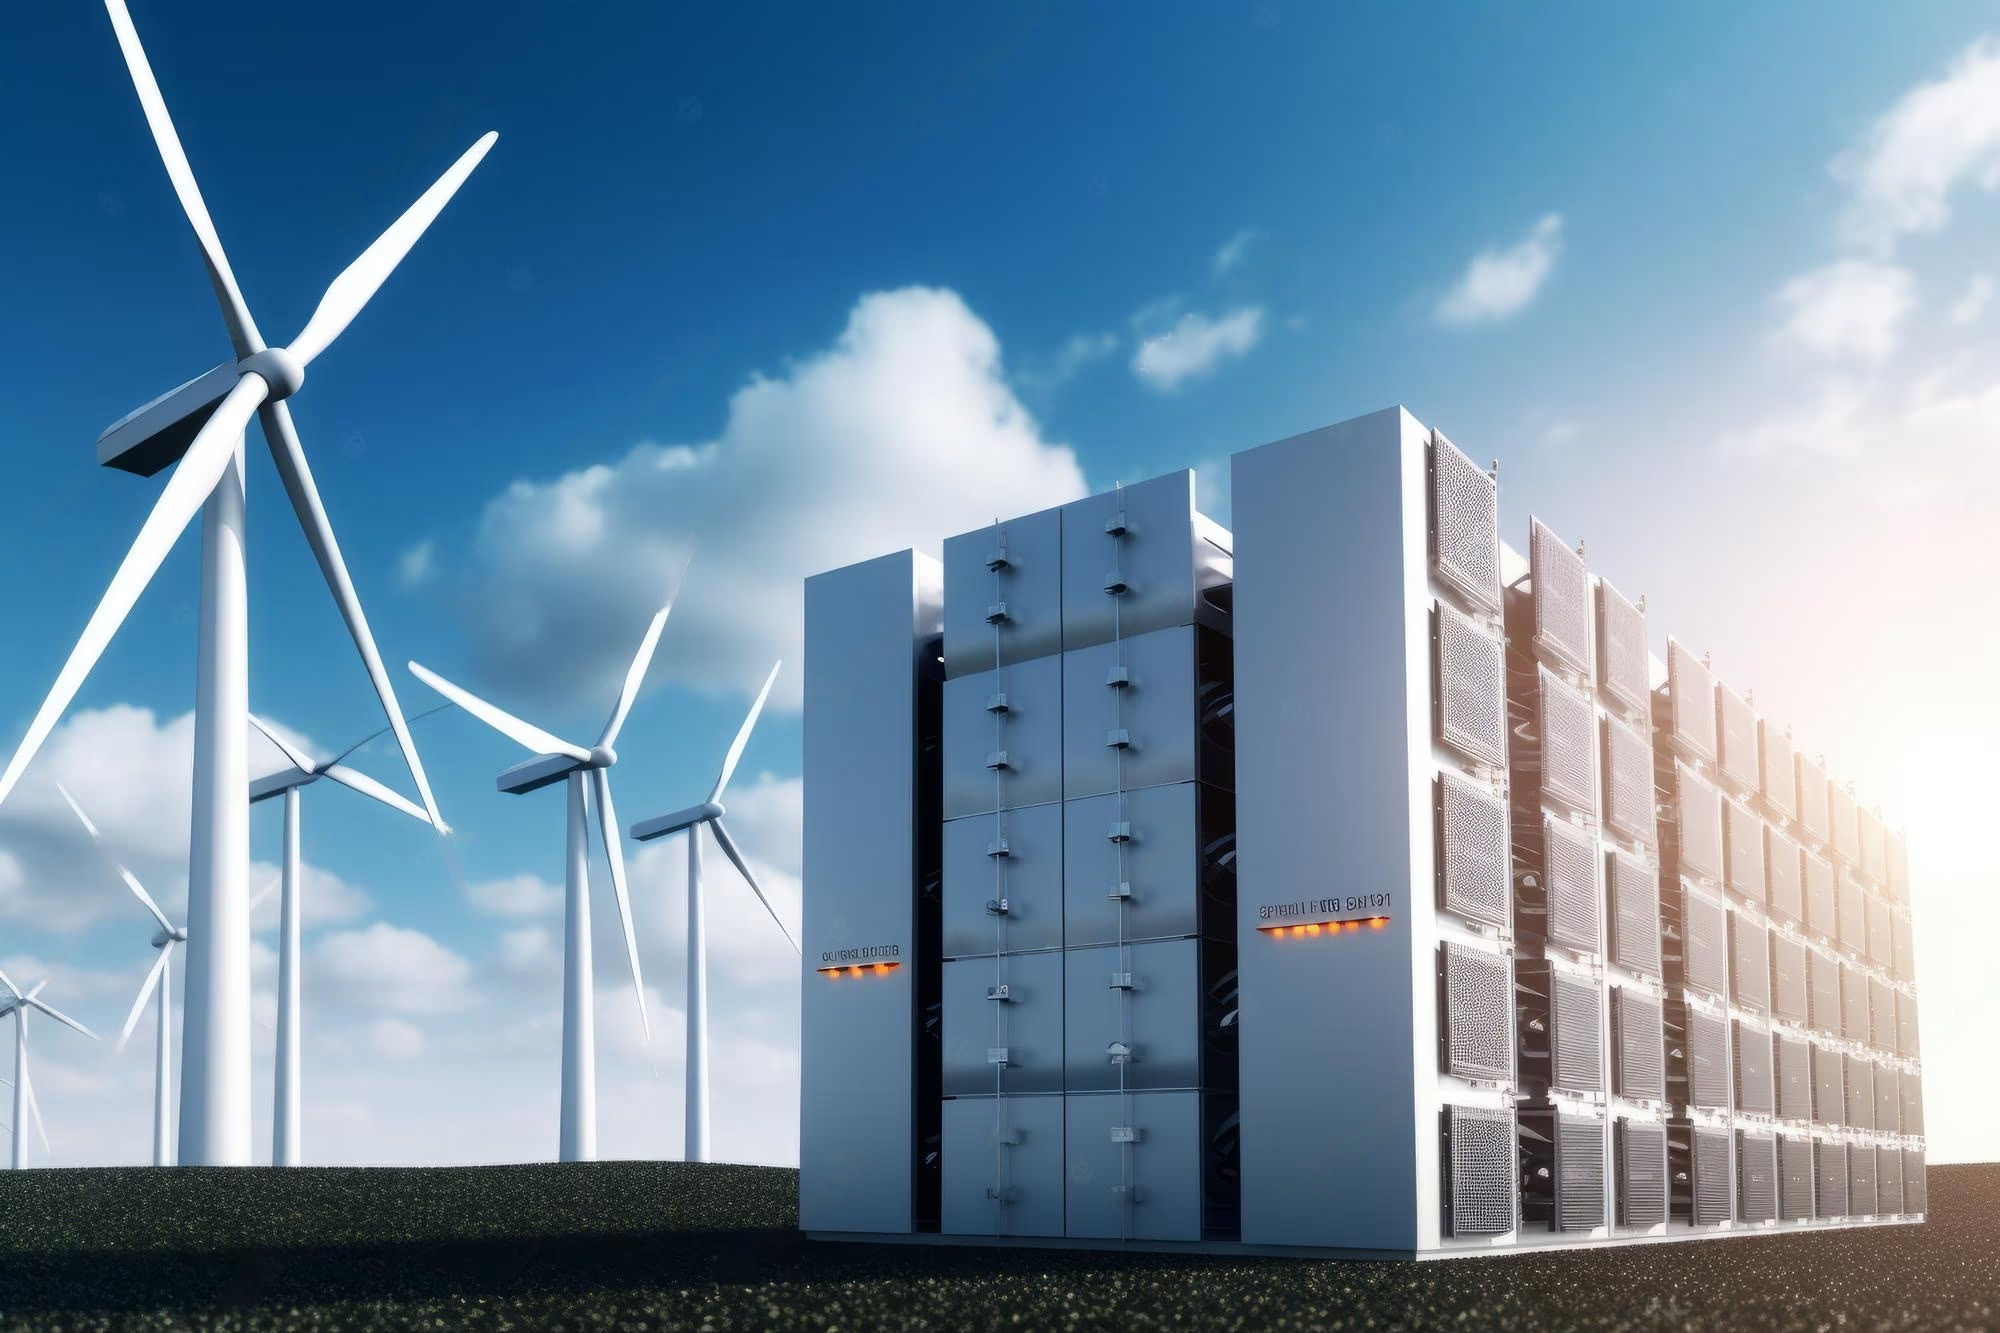 Long Duration Energy Storage: Paving the Way for a Sustainable Power Grid